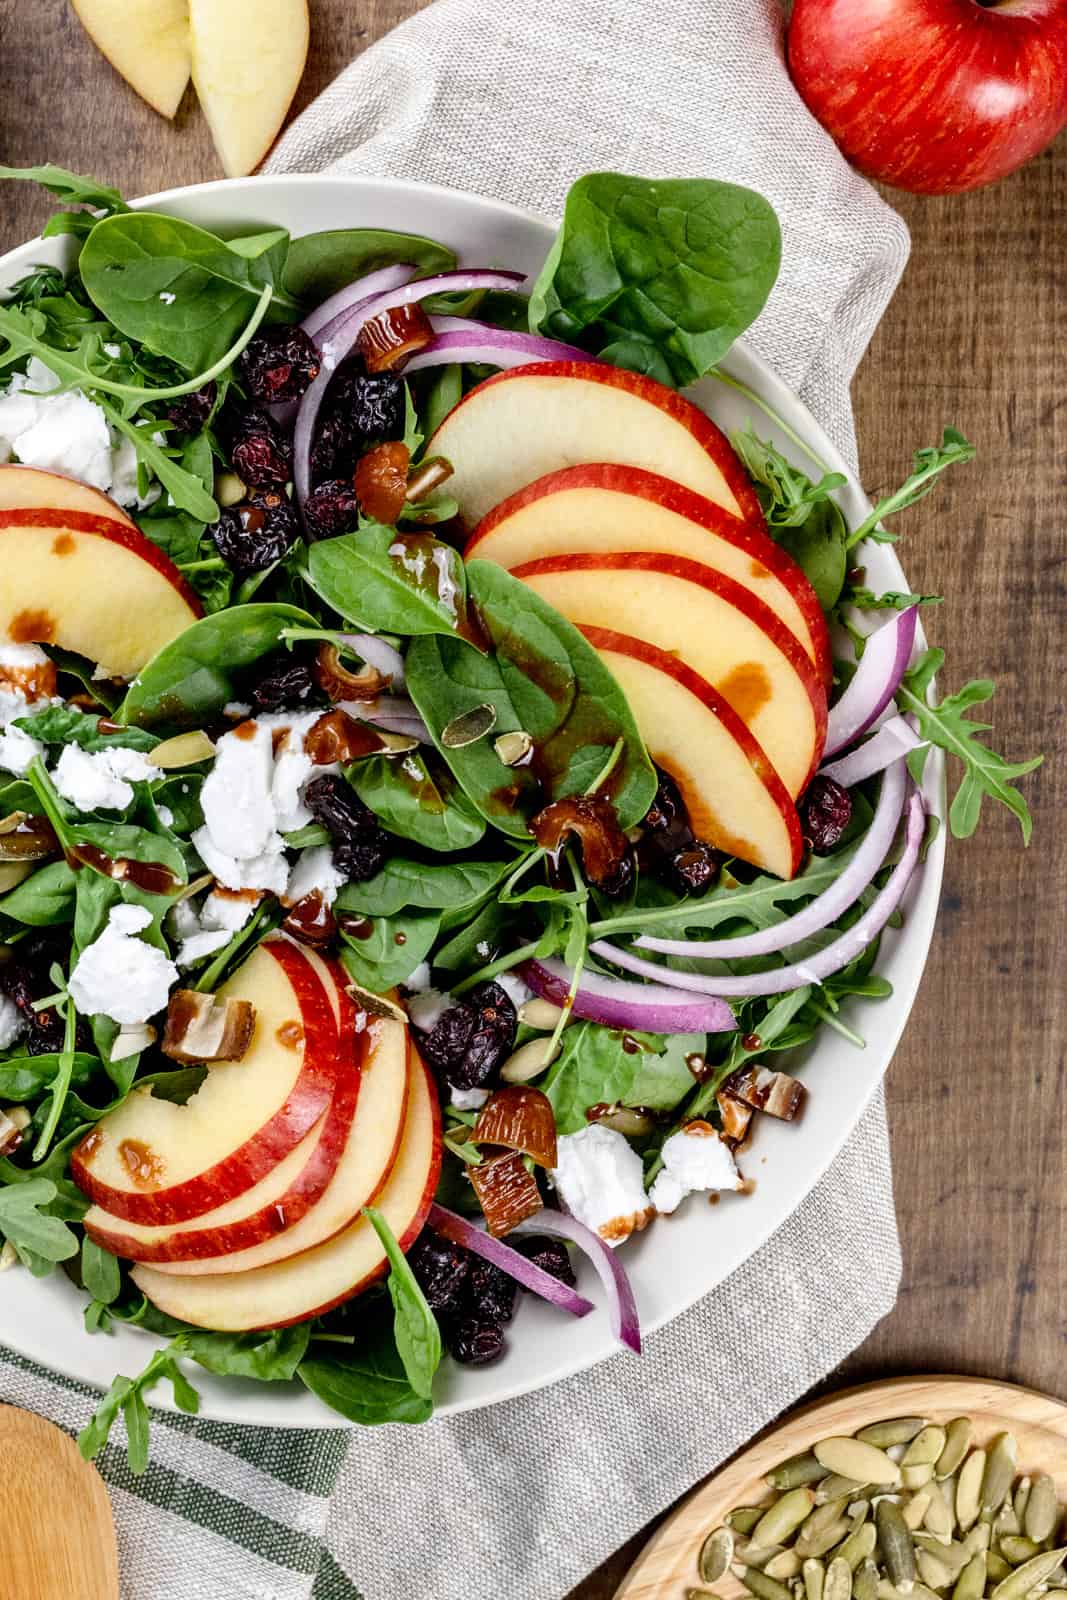 Closeup of a big bowl of a fuji apple salad filled with greens, apples, red onion, and other ingredients. A towel and other ingredients surround the bowl.